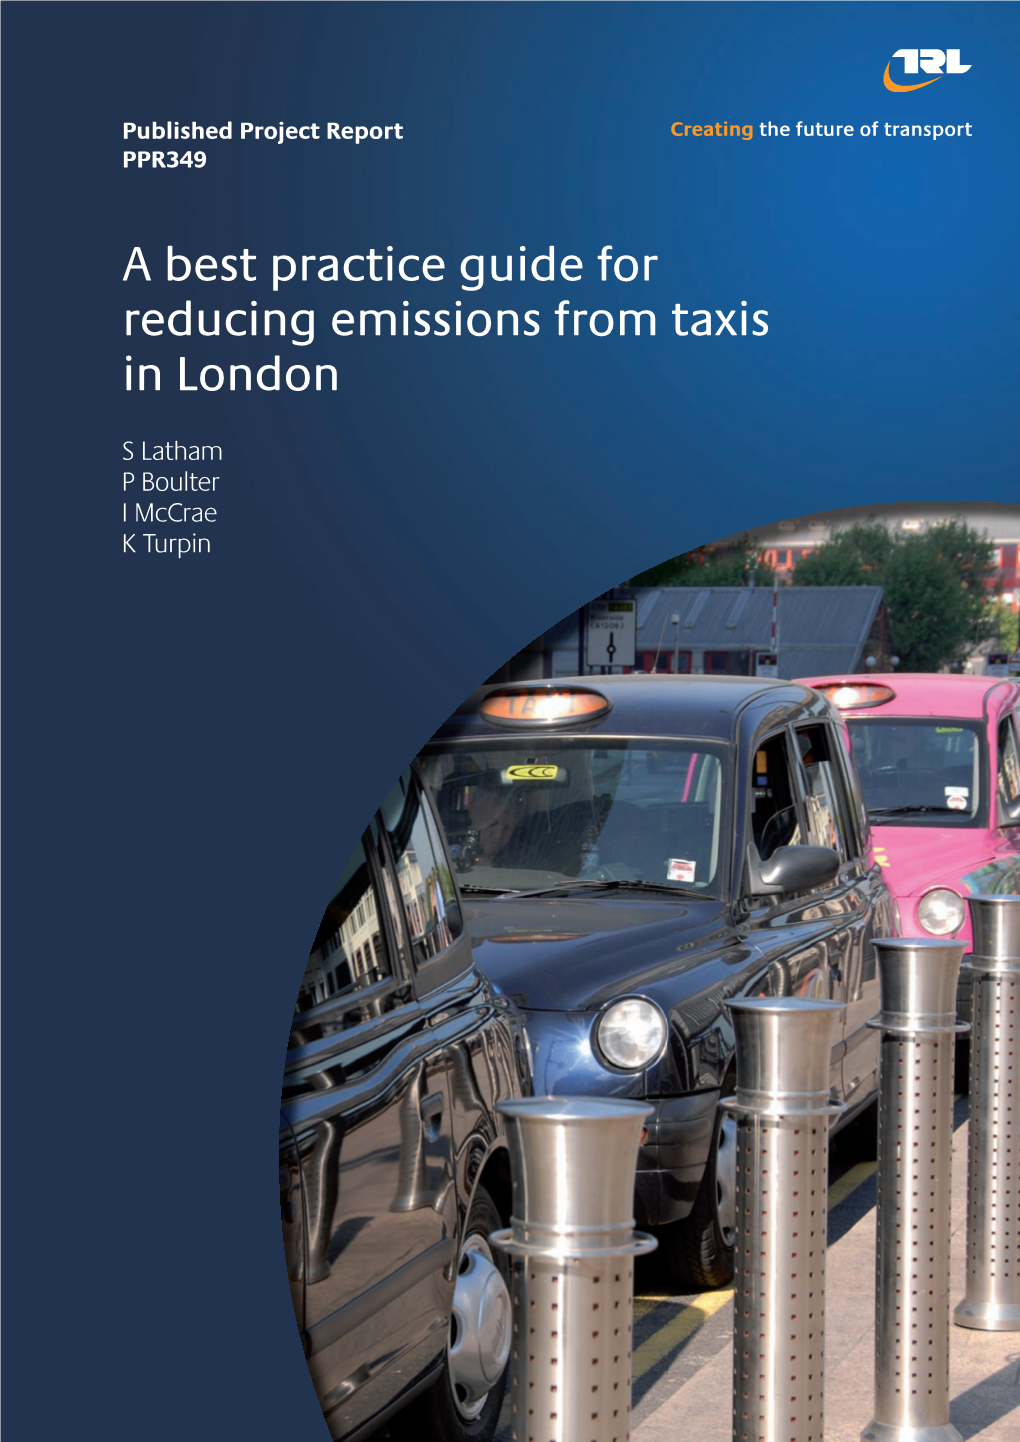 A Best Practice Guide for Reducing Emissions from Taxis in London